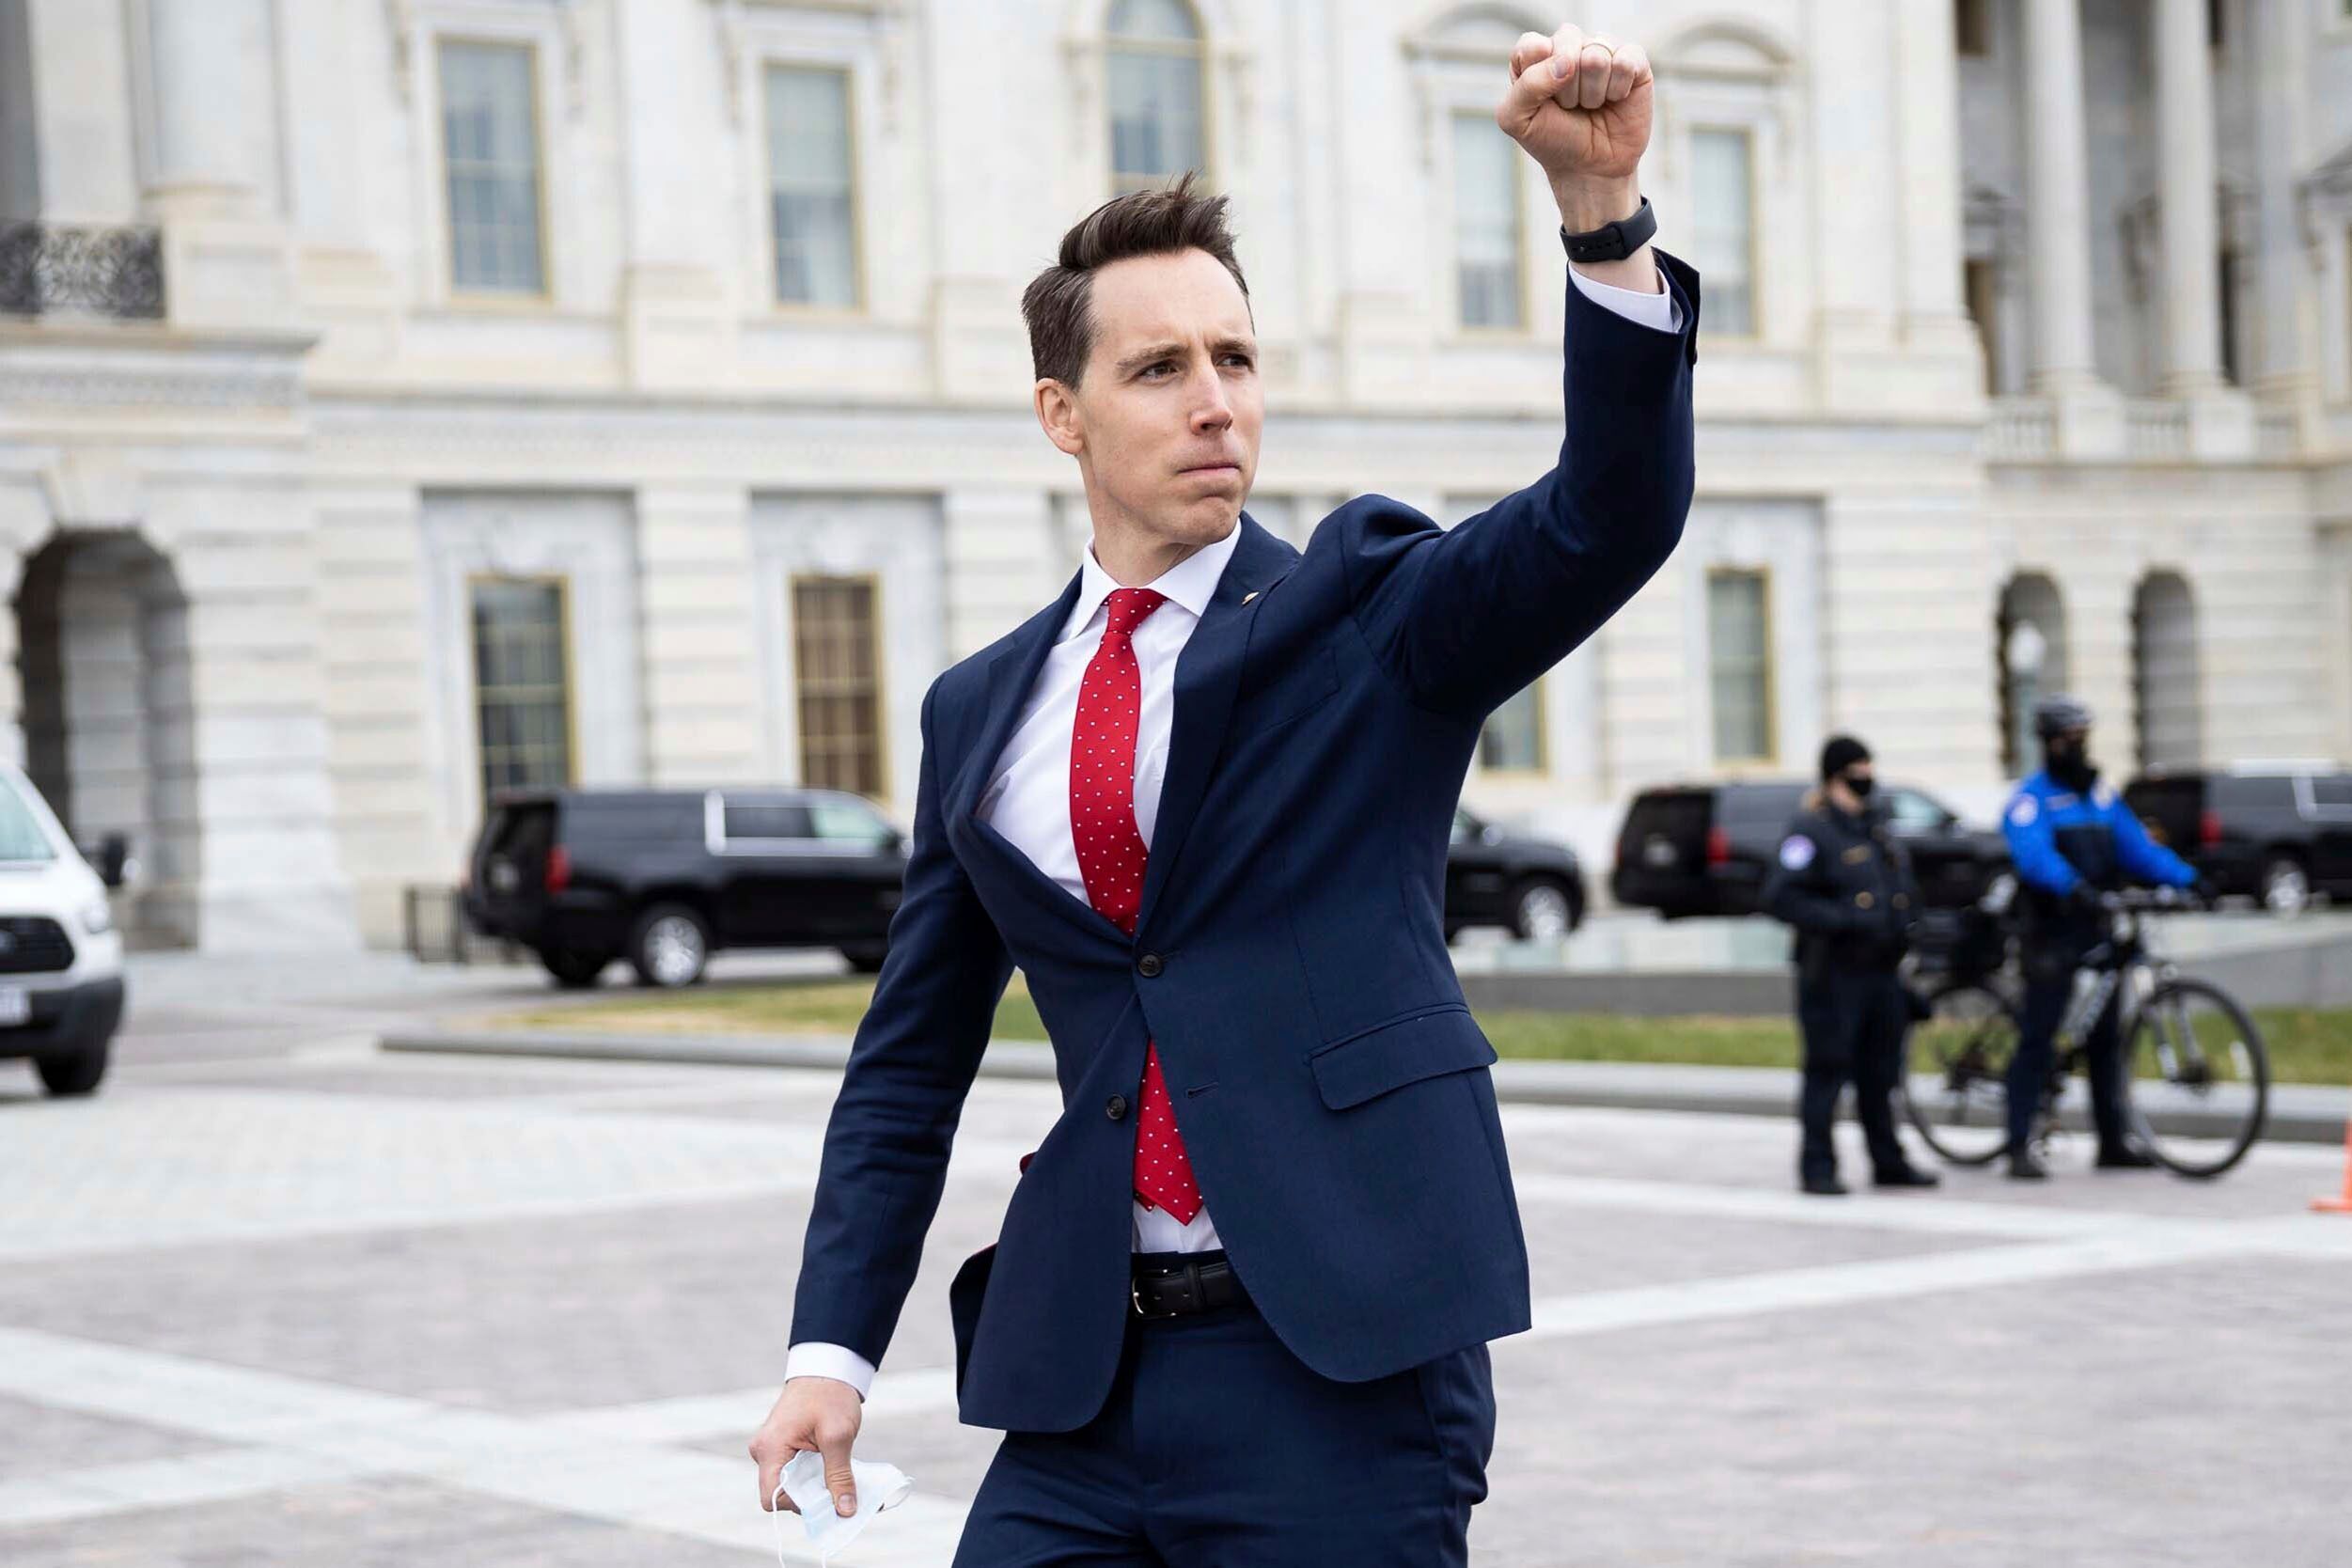 St. Louis Newspaper Bashes GOP, Josh Hawley For 'Contempt' Of Democracy